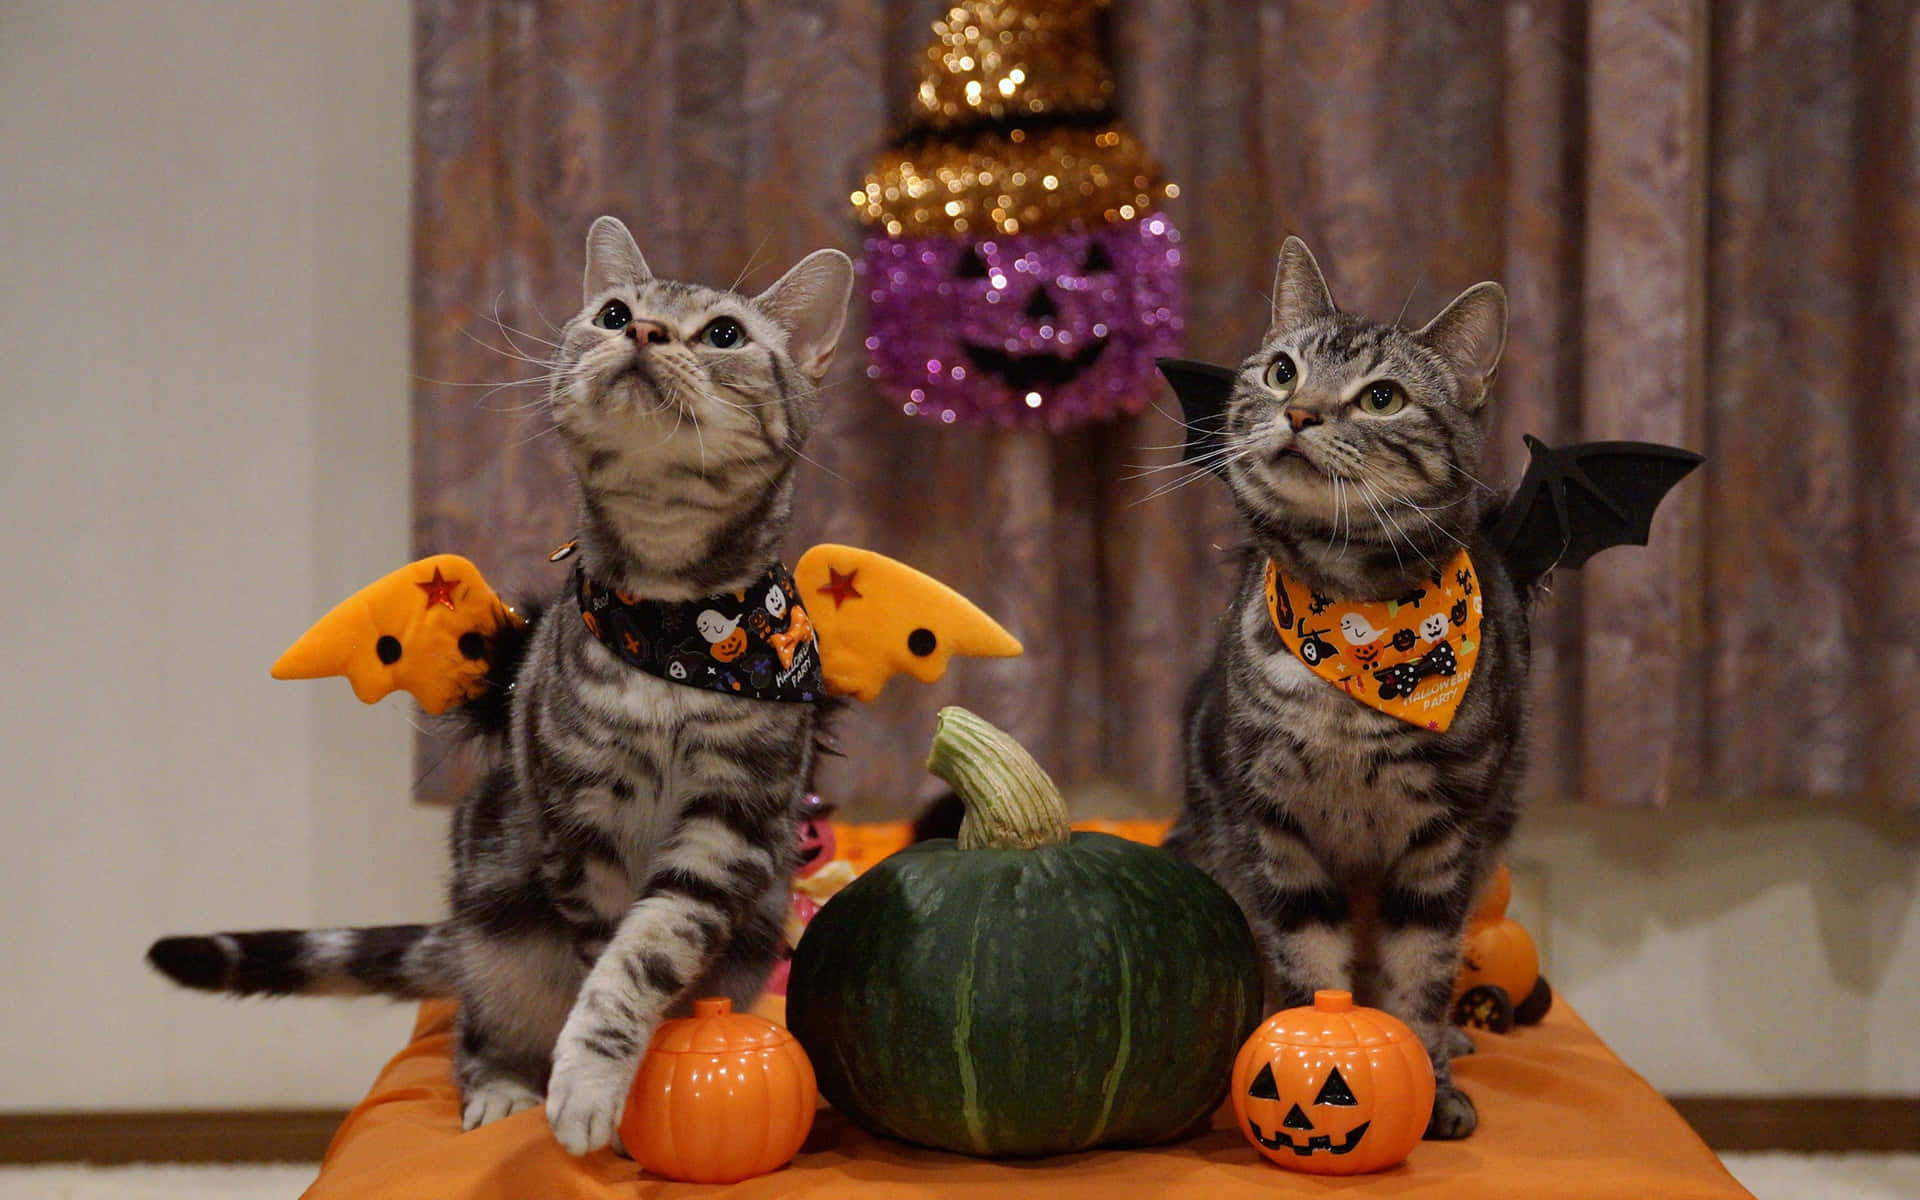 A fun and cute Halloween celebration with your loved ones!